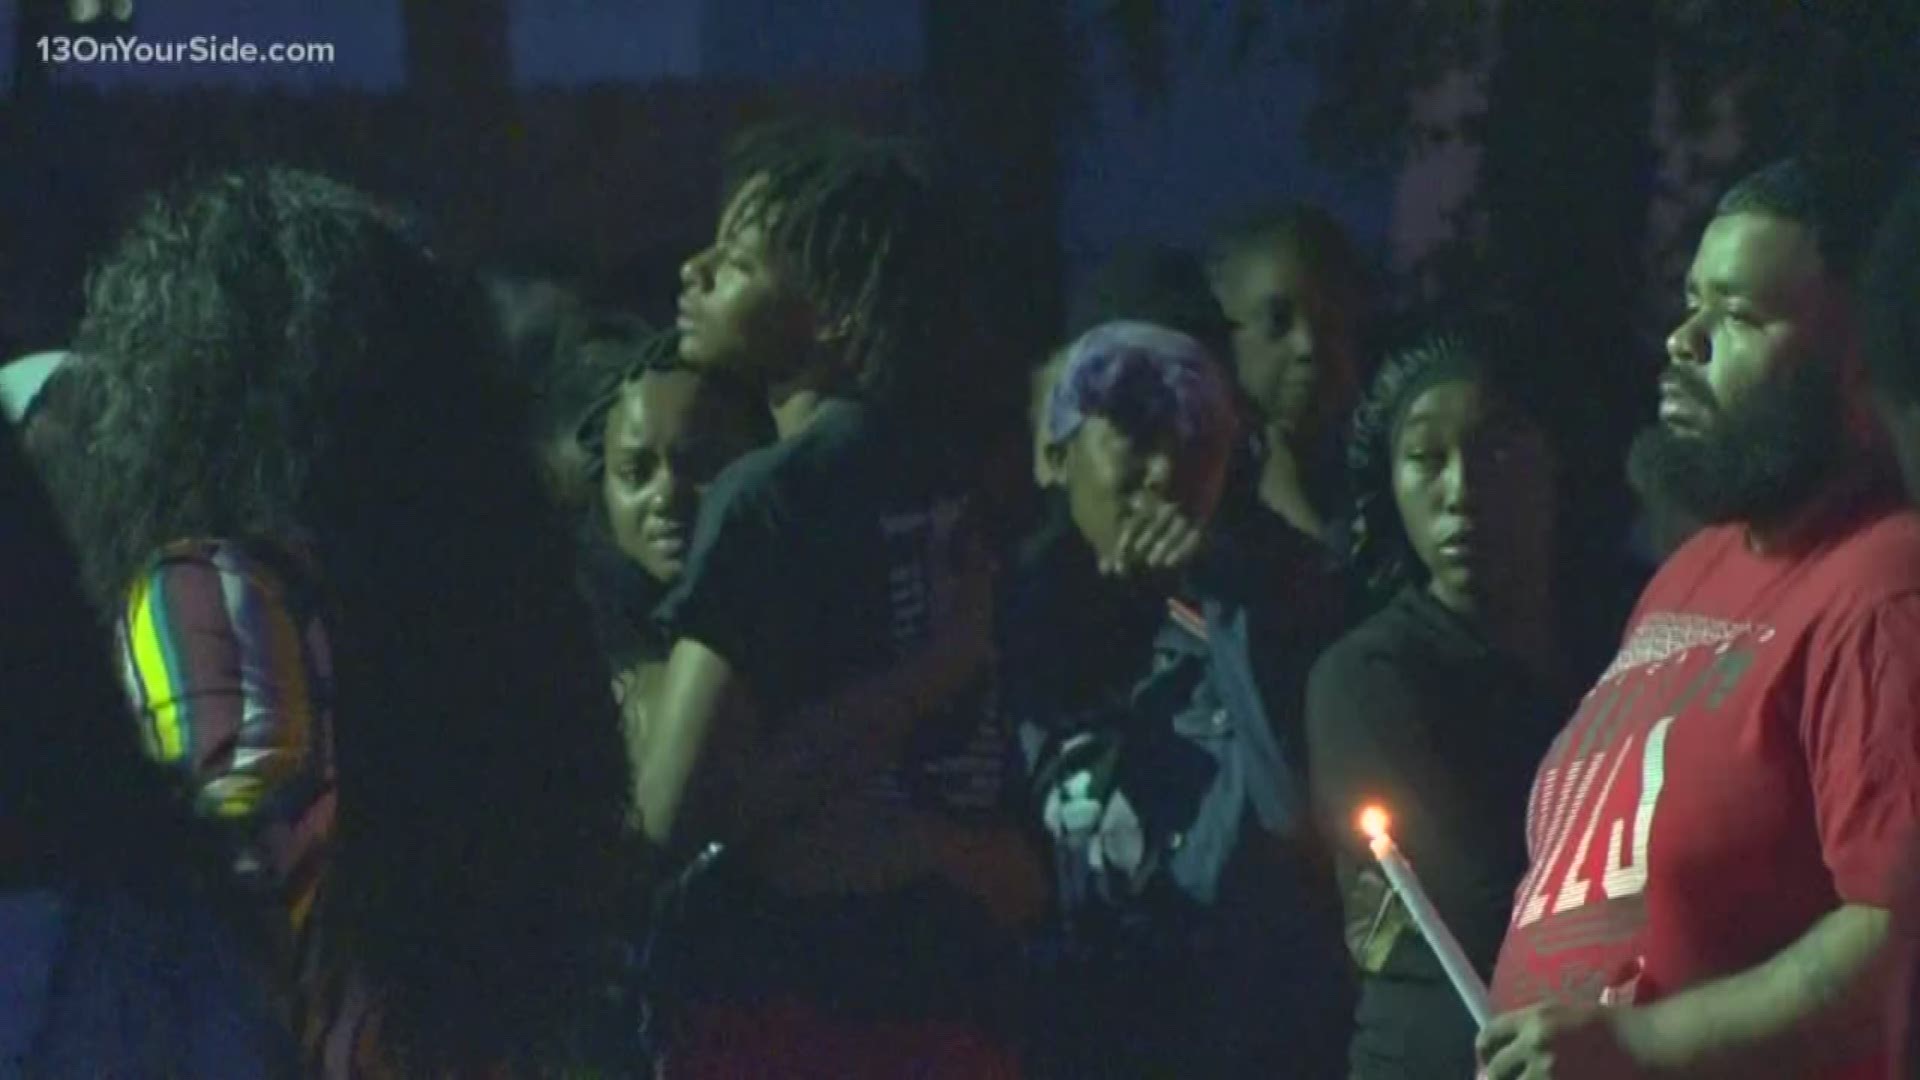 A 16-year-old was shot and killed in Muskegon late Saturday night. Family, friends and members of the community held a vigil for the teen.